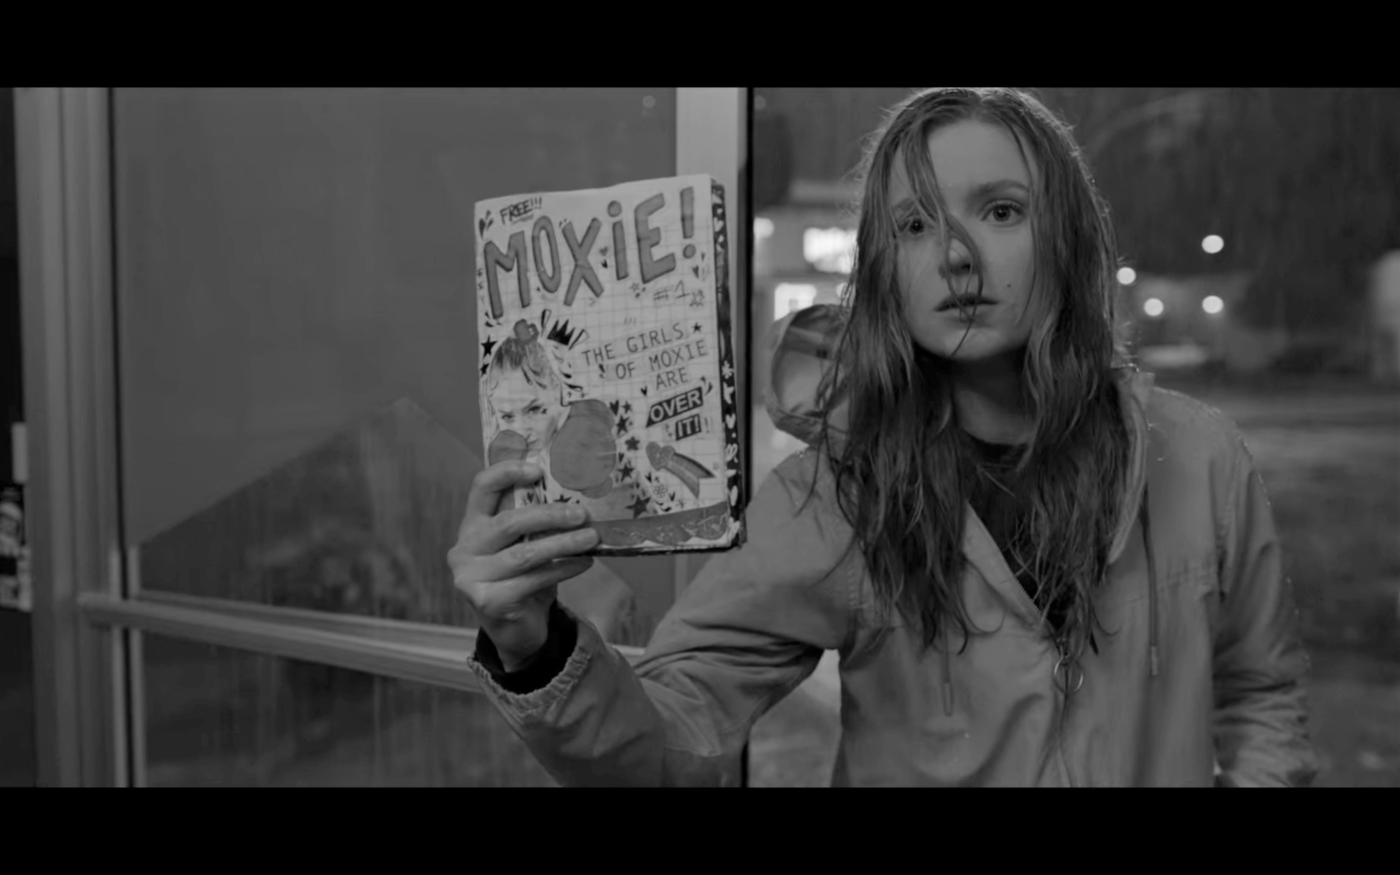 Greyscale. The film's protagonist, 16-year-old Vivian, holds up a copy of the Moxie zine. A white girl, with long blonde hair, she looks earnest and naive - though the graphic design on the front cover is bold. The free zine shows a white girl with boxing gloves on with the headline, "The Girls Of Moxie Are Over It!"